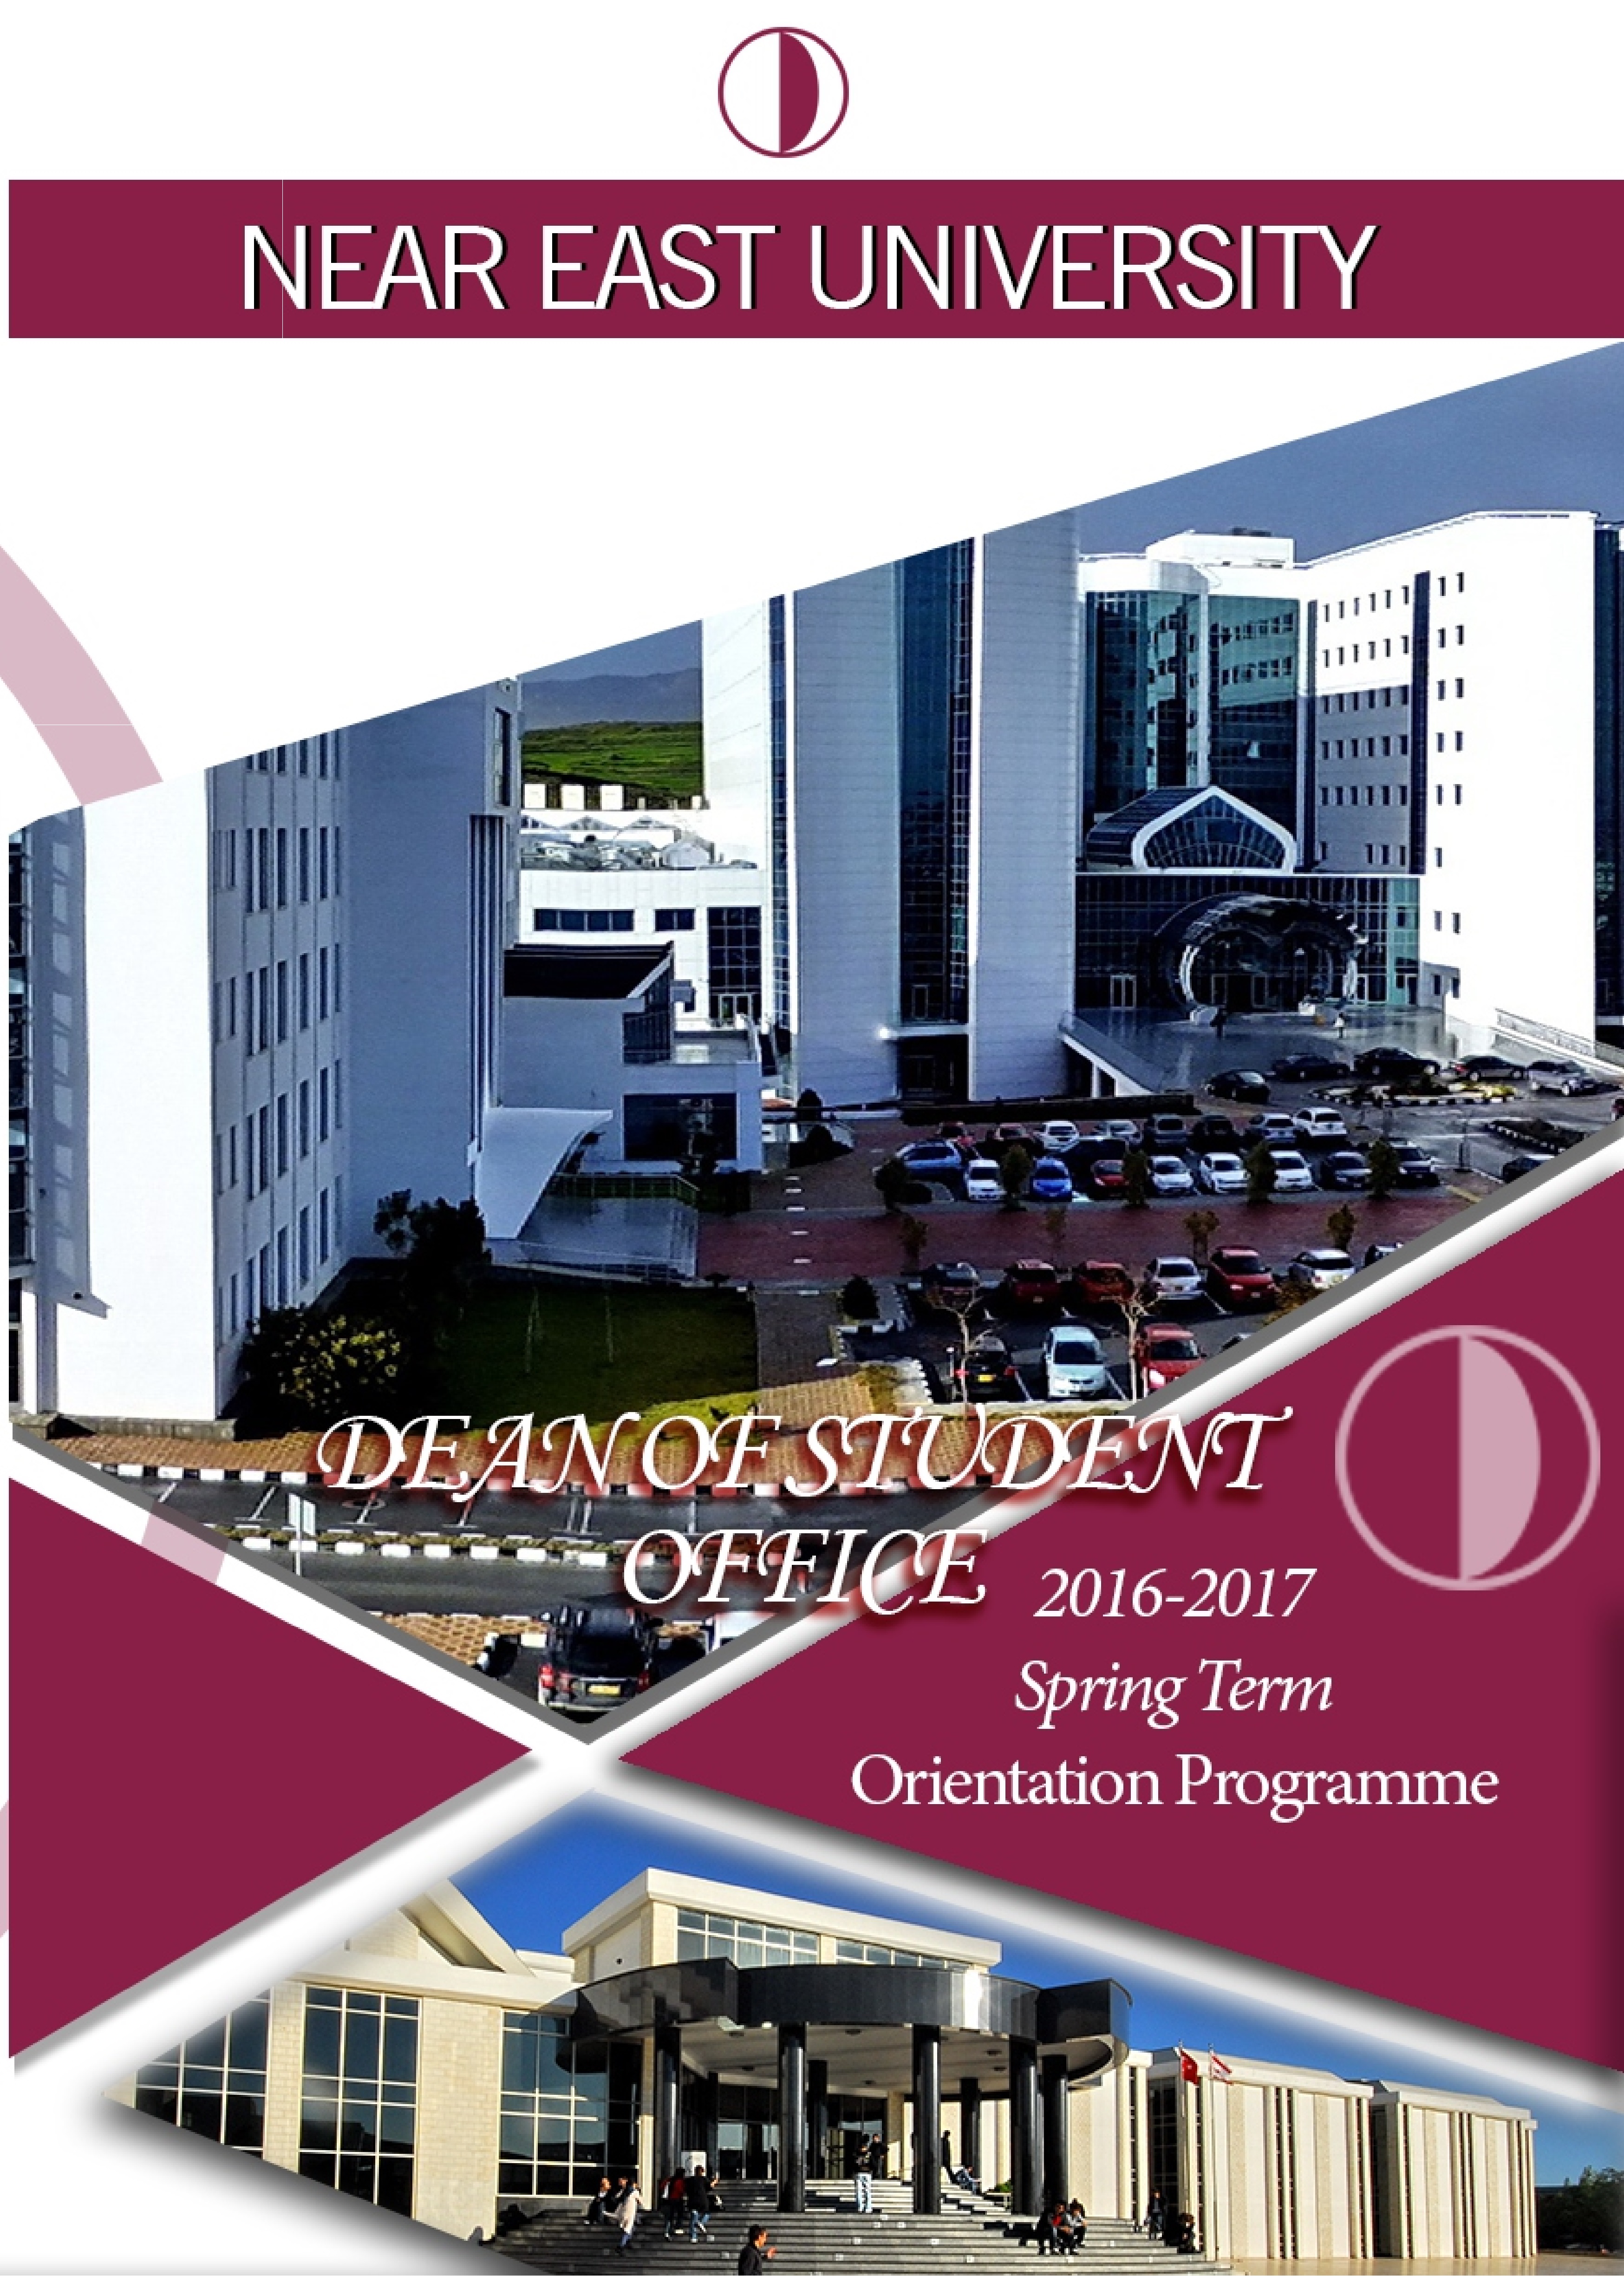 20162017 Spring Term Orientation Program offers new students the